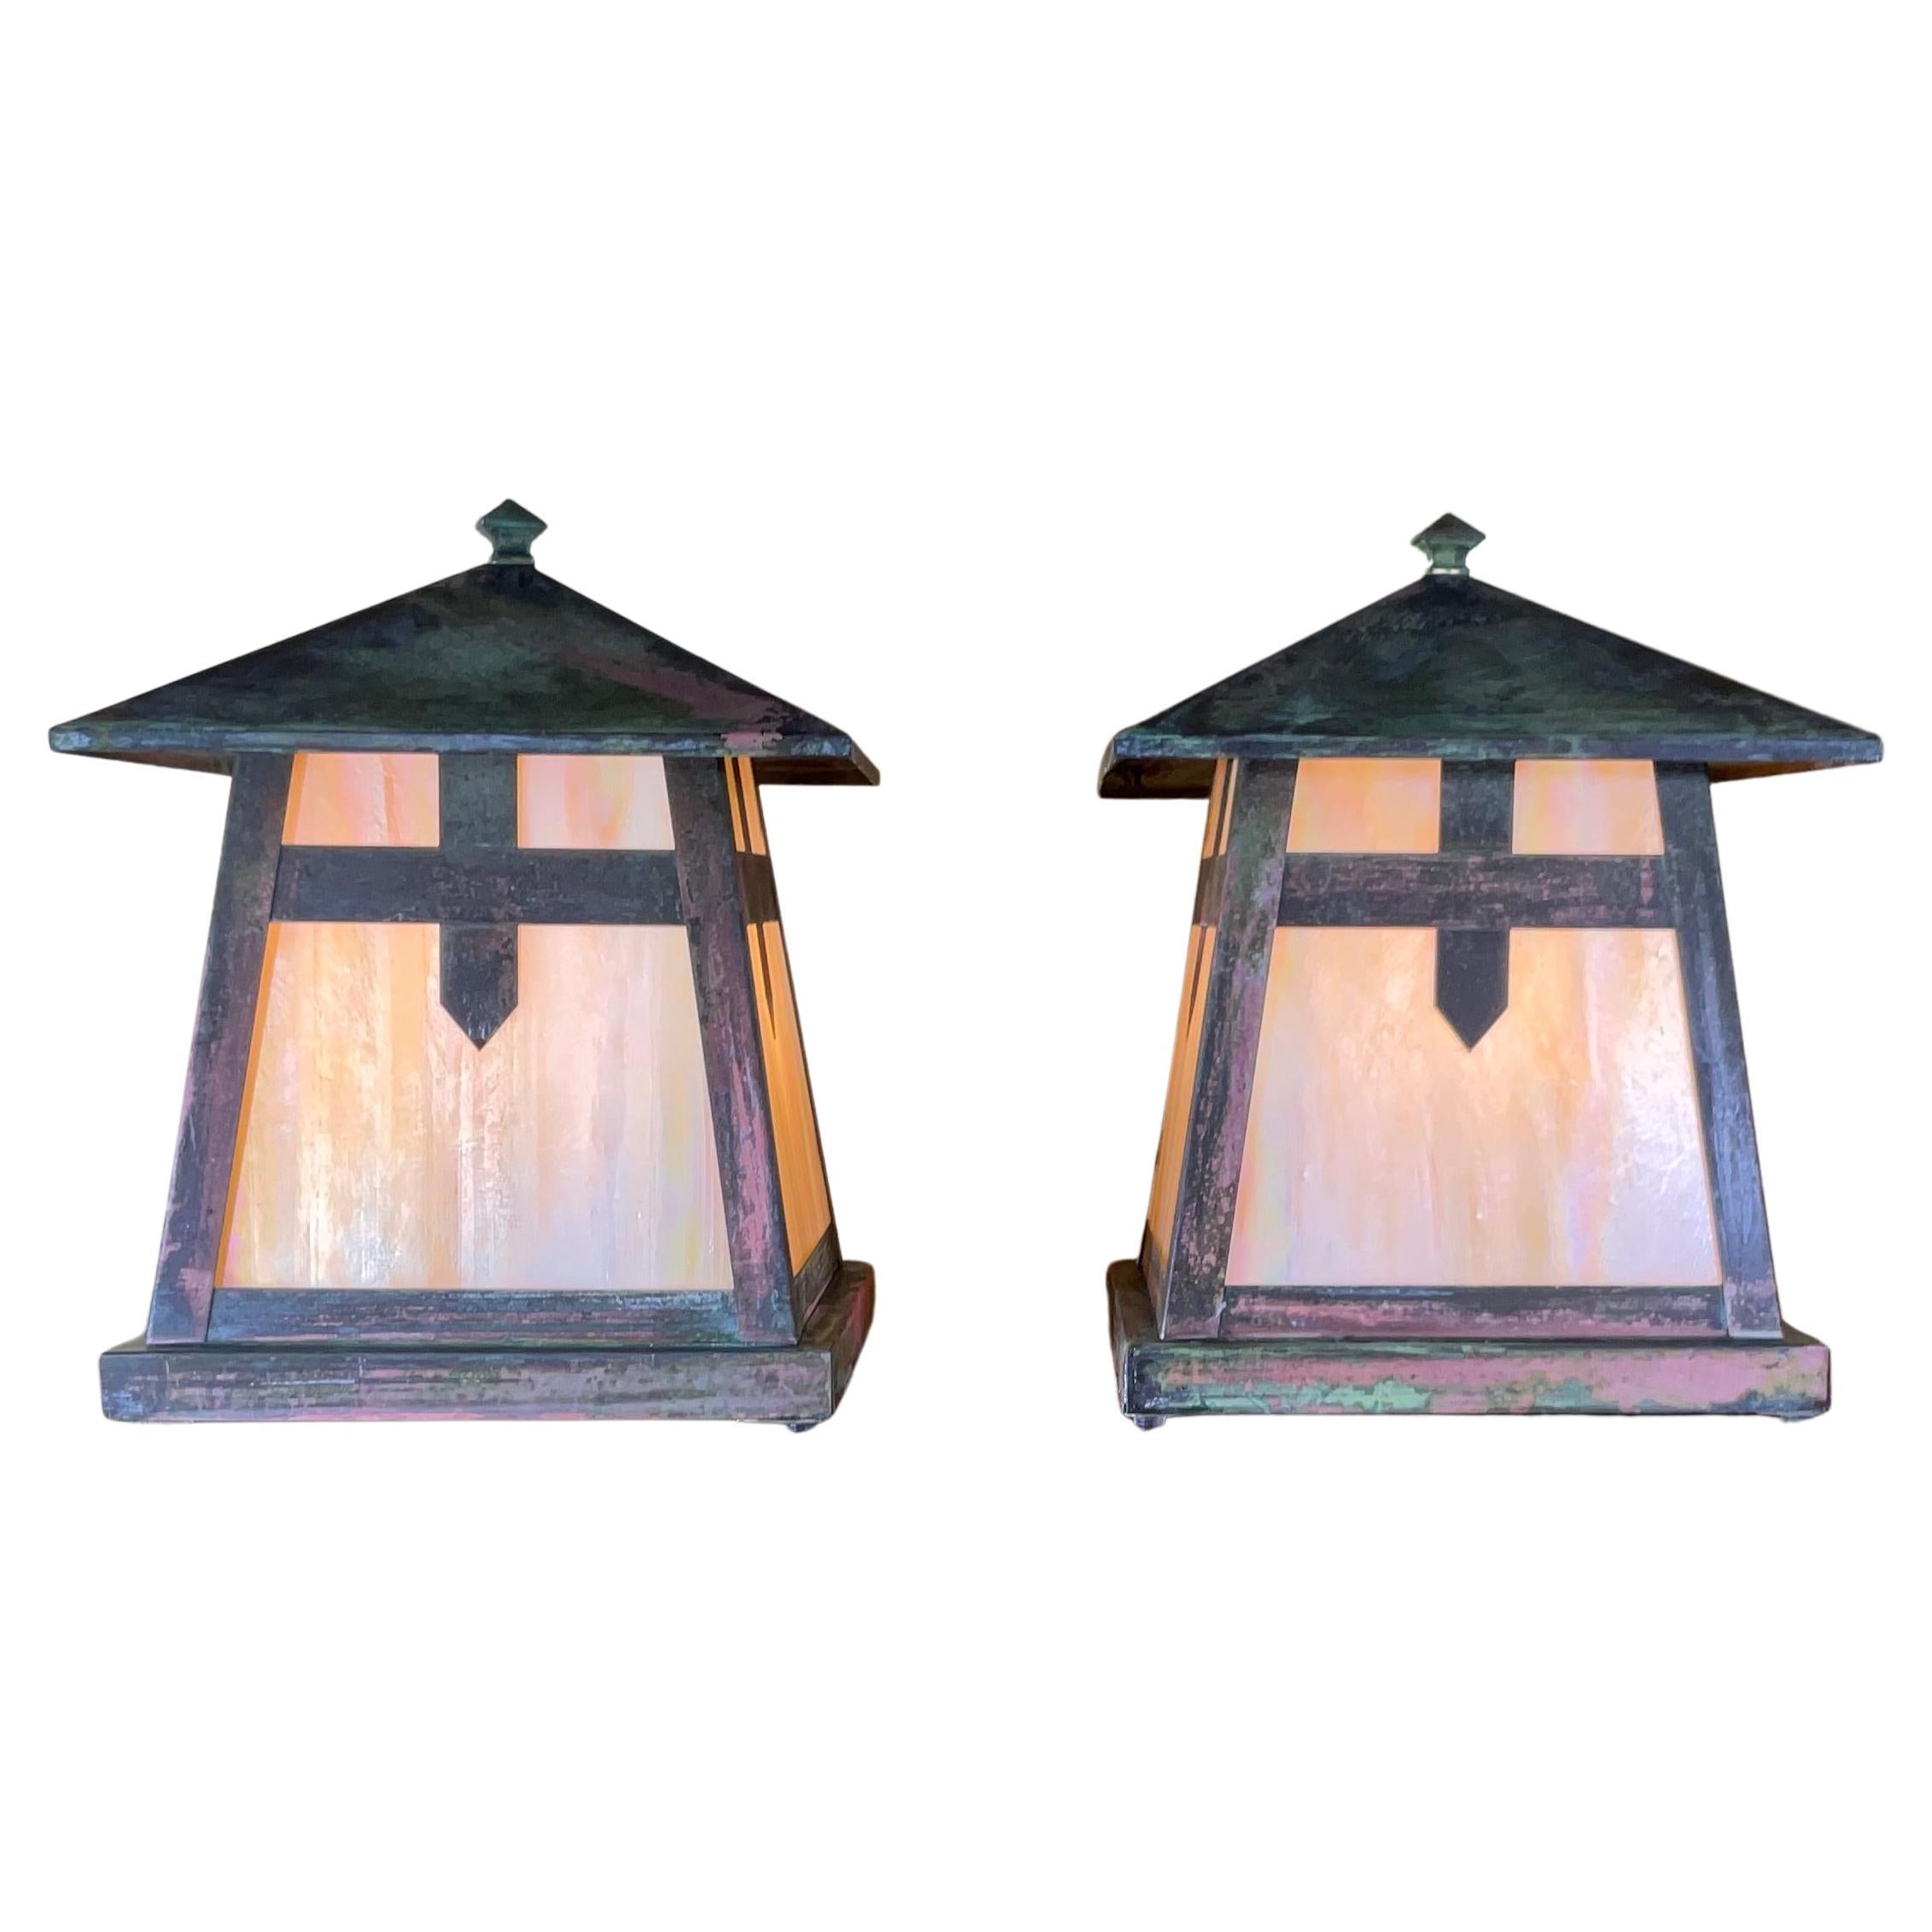 One of a Kind Pair of Art and Craft Copper Table Lamp